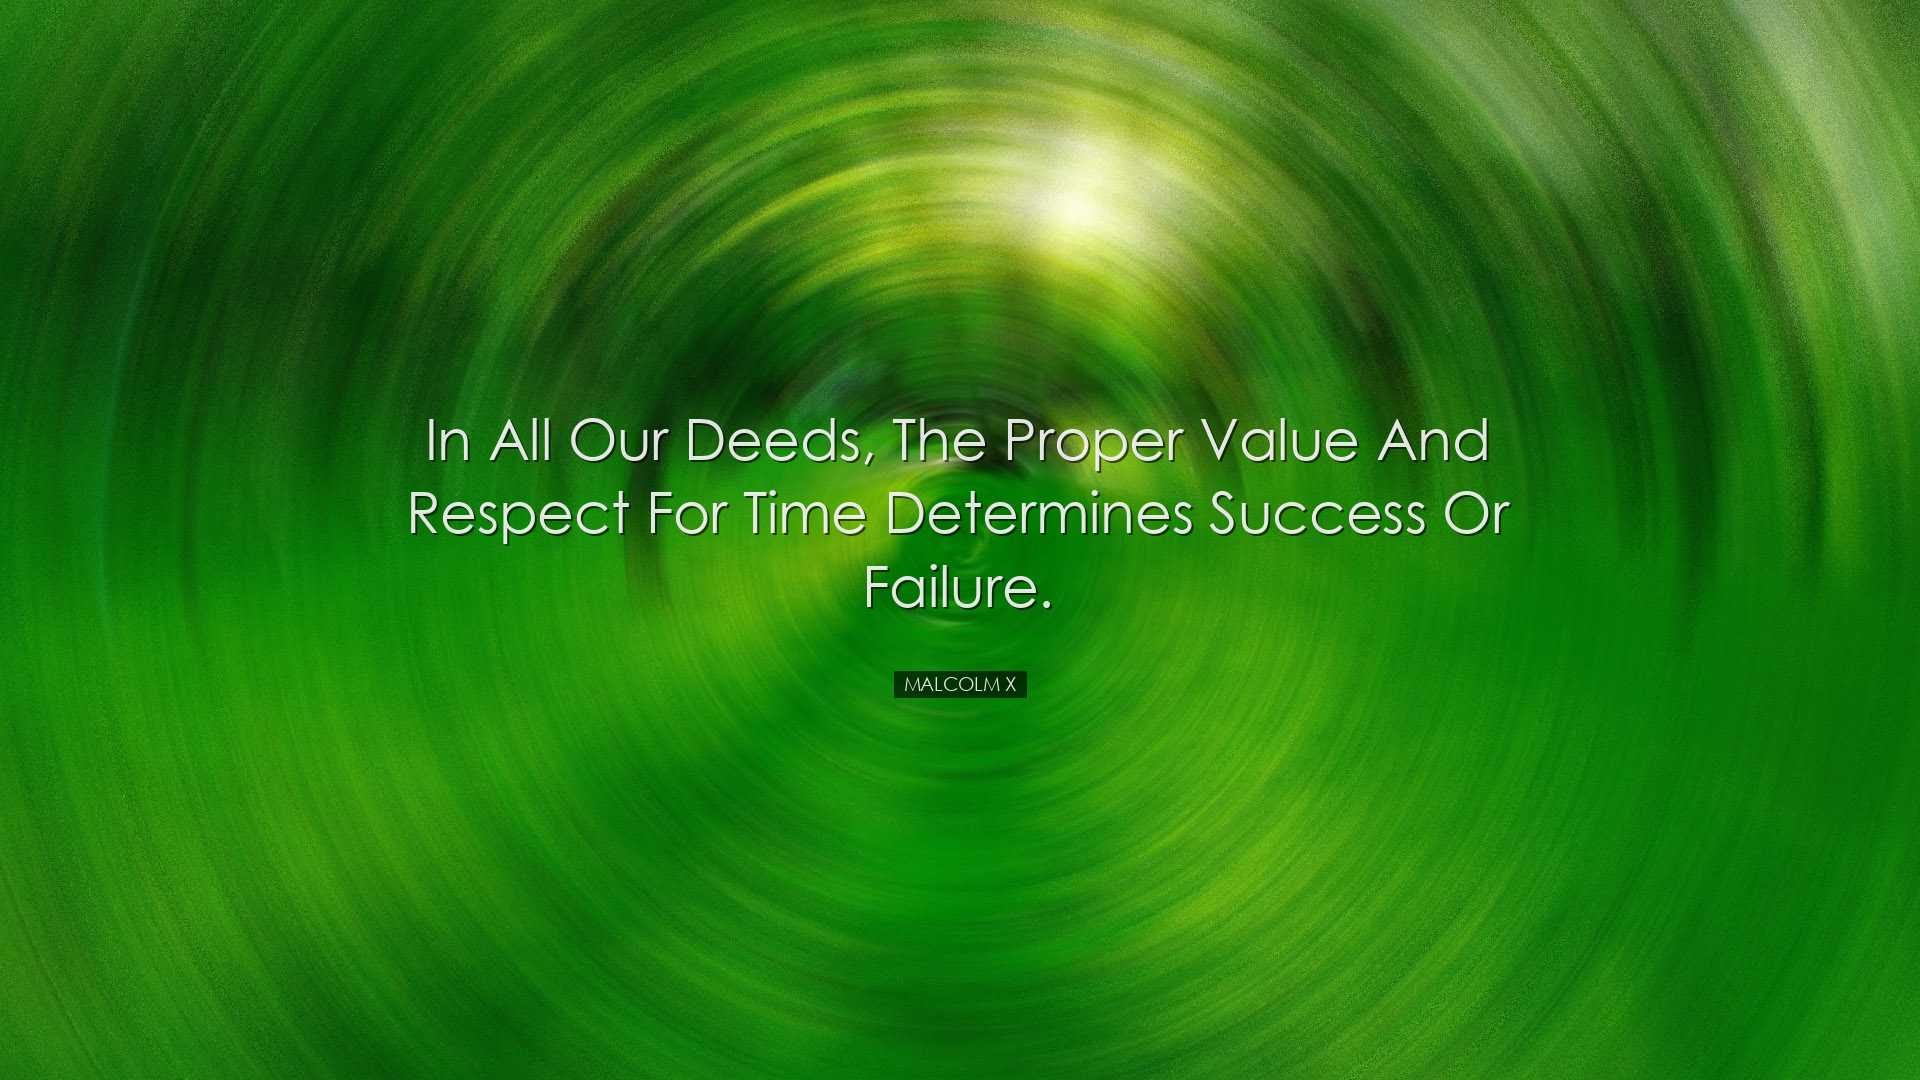 In all our deeds, the proper value and respect for time determines